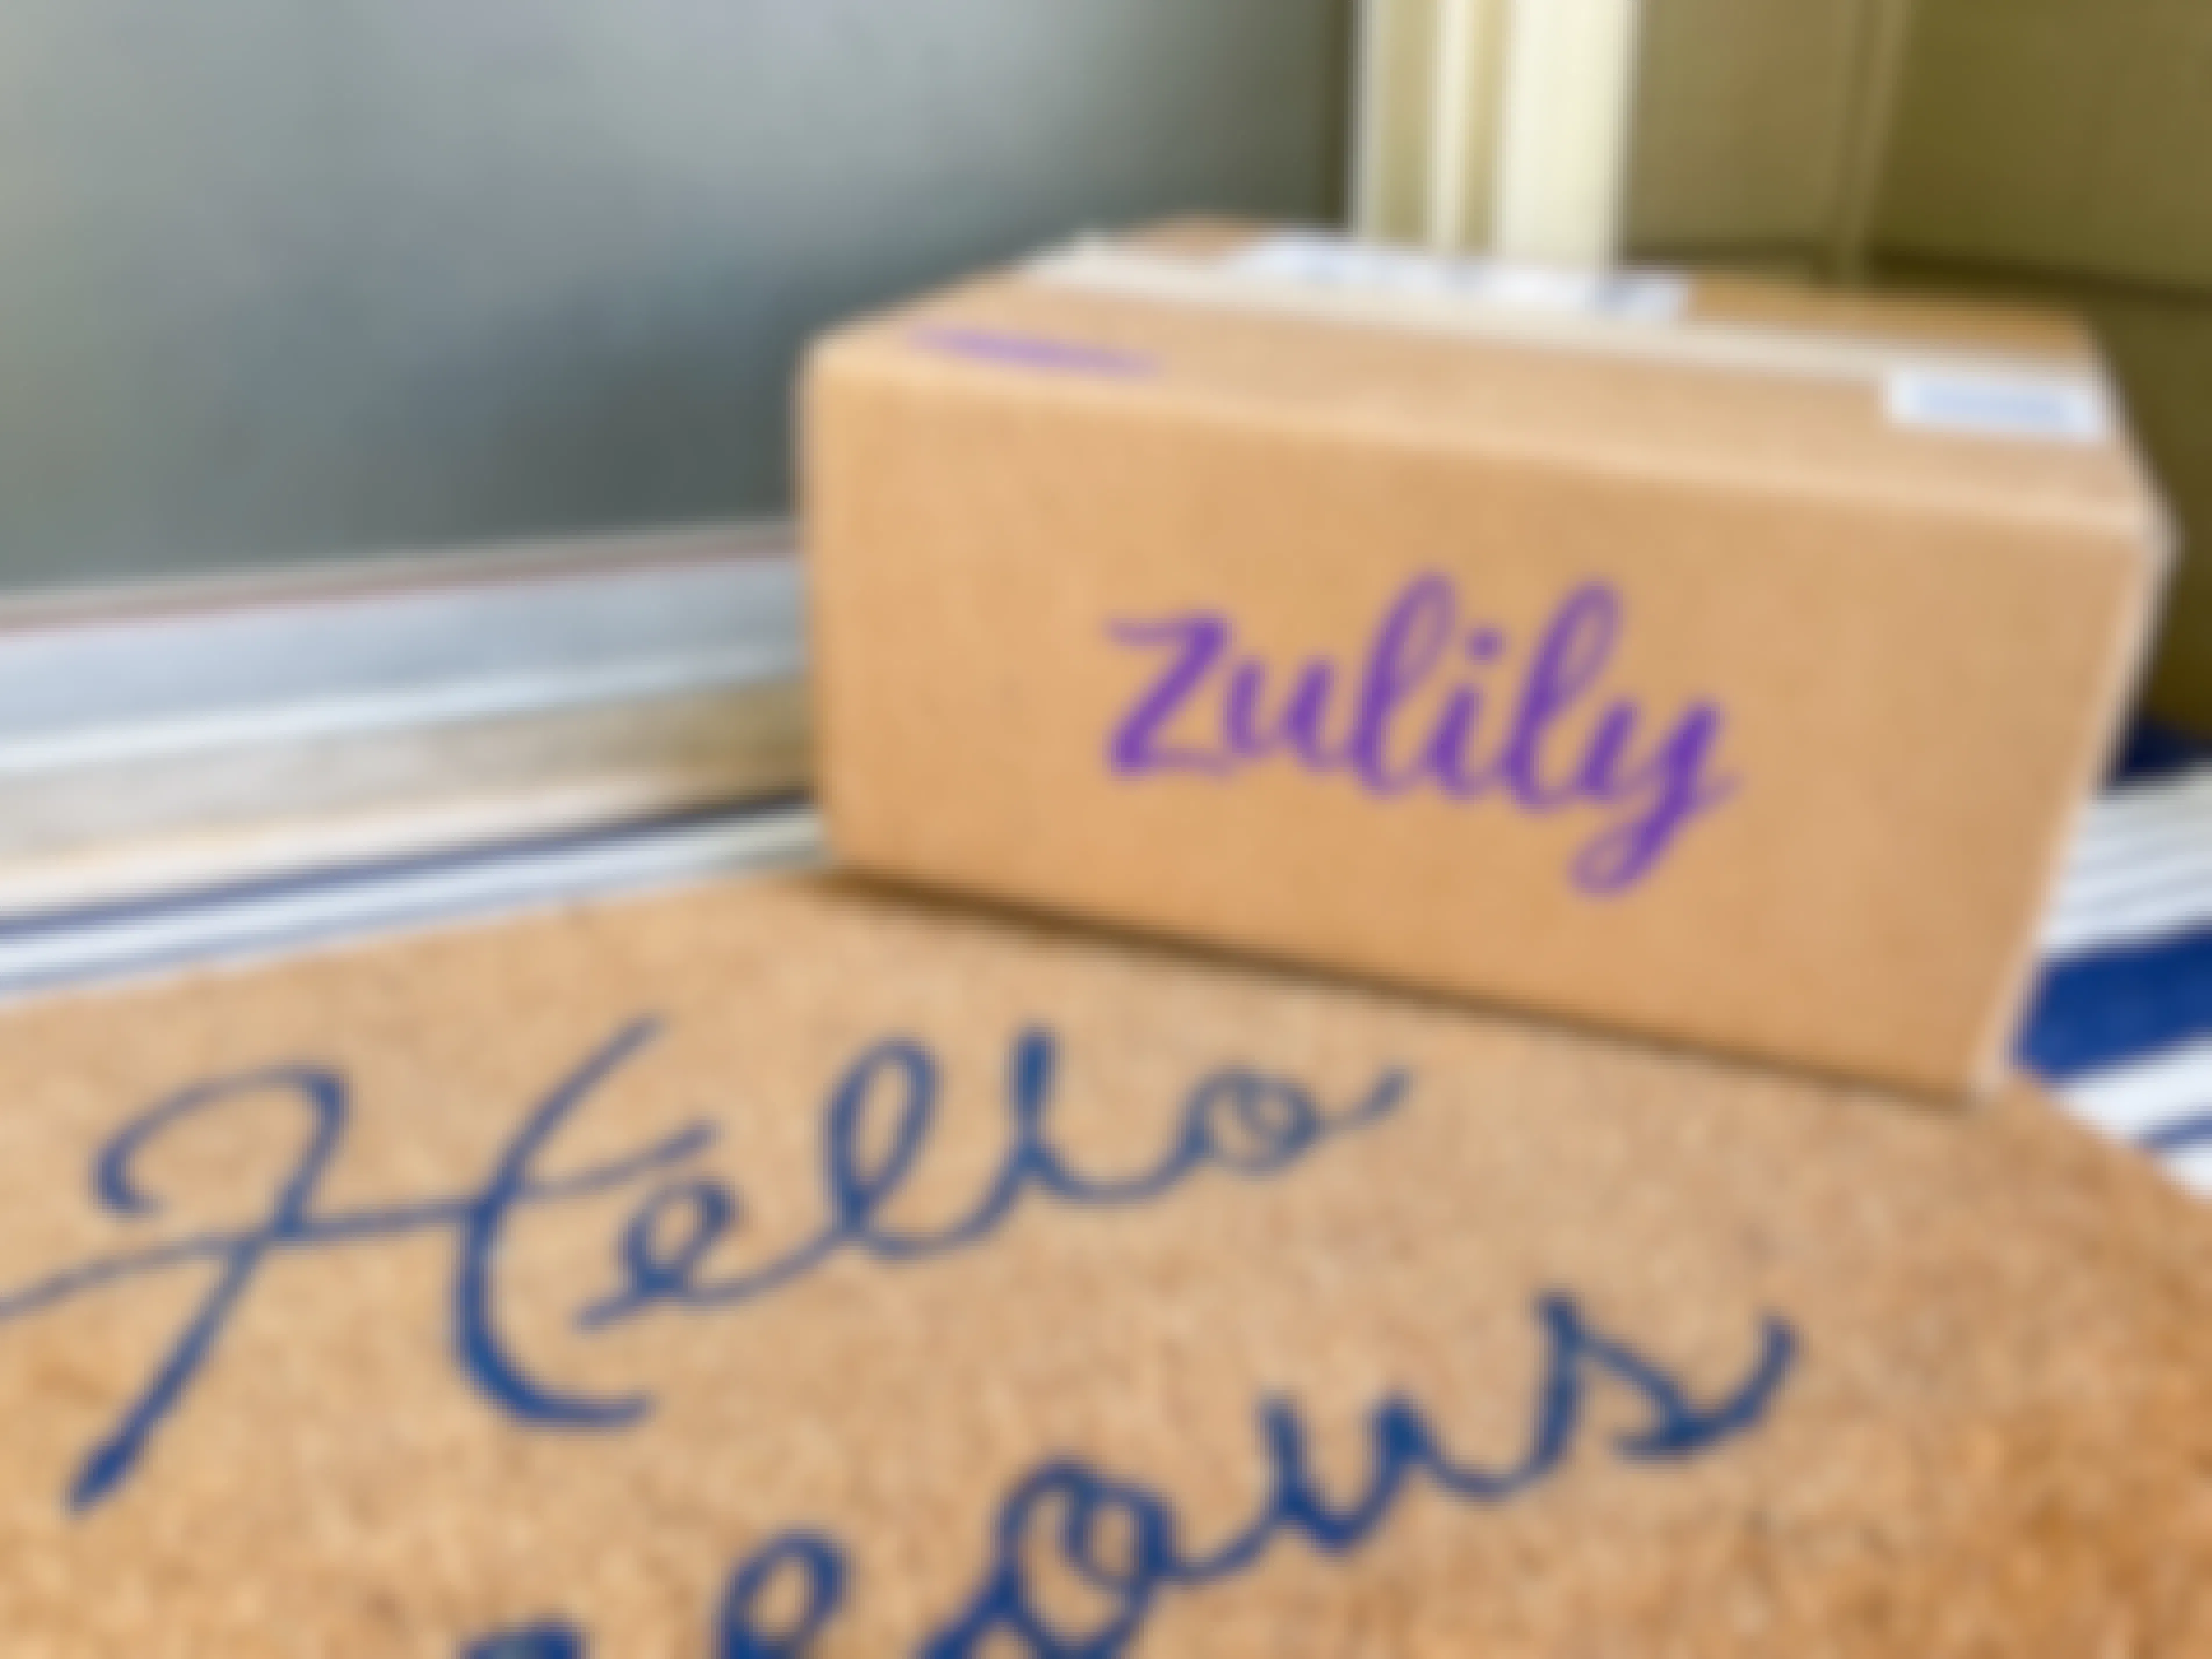 A Zulily box sitting on a front porch in front of someone's front door.